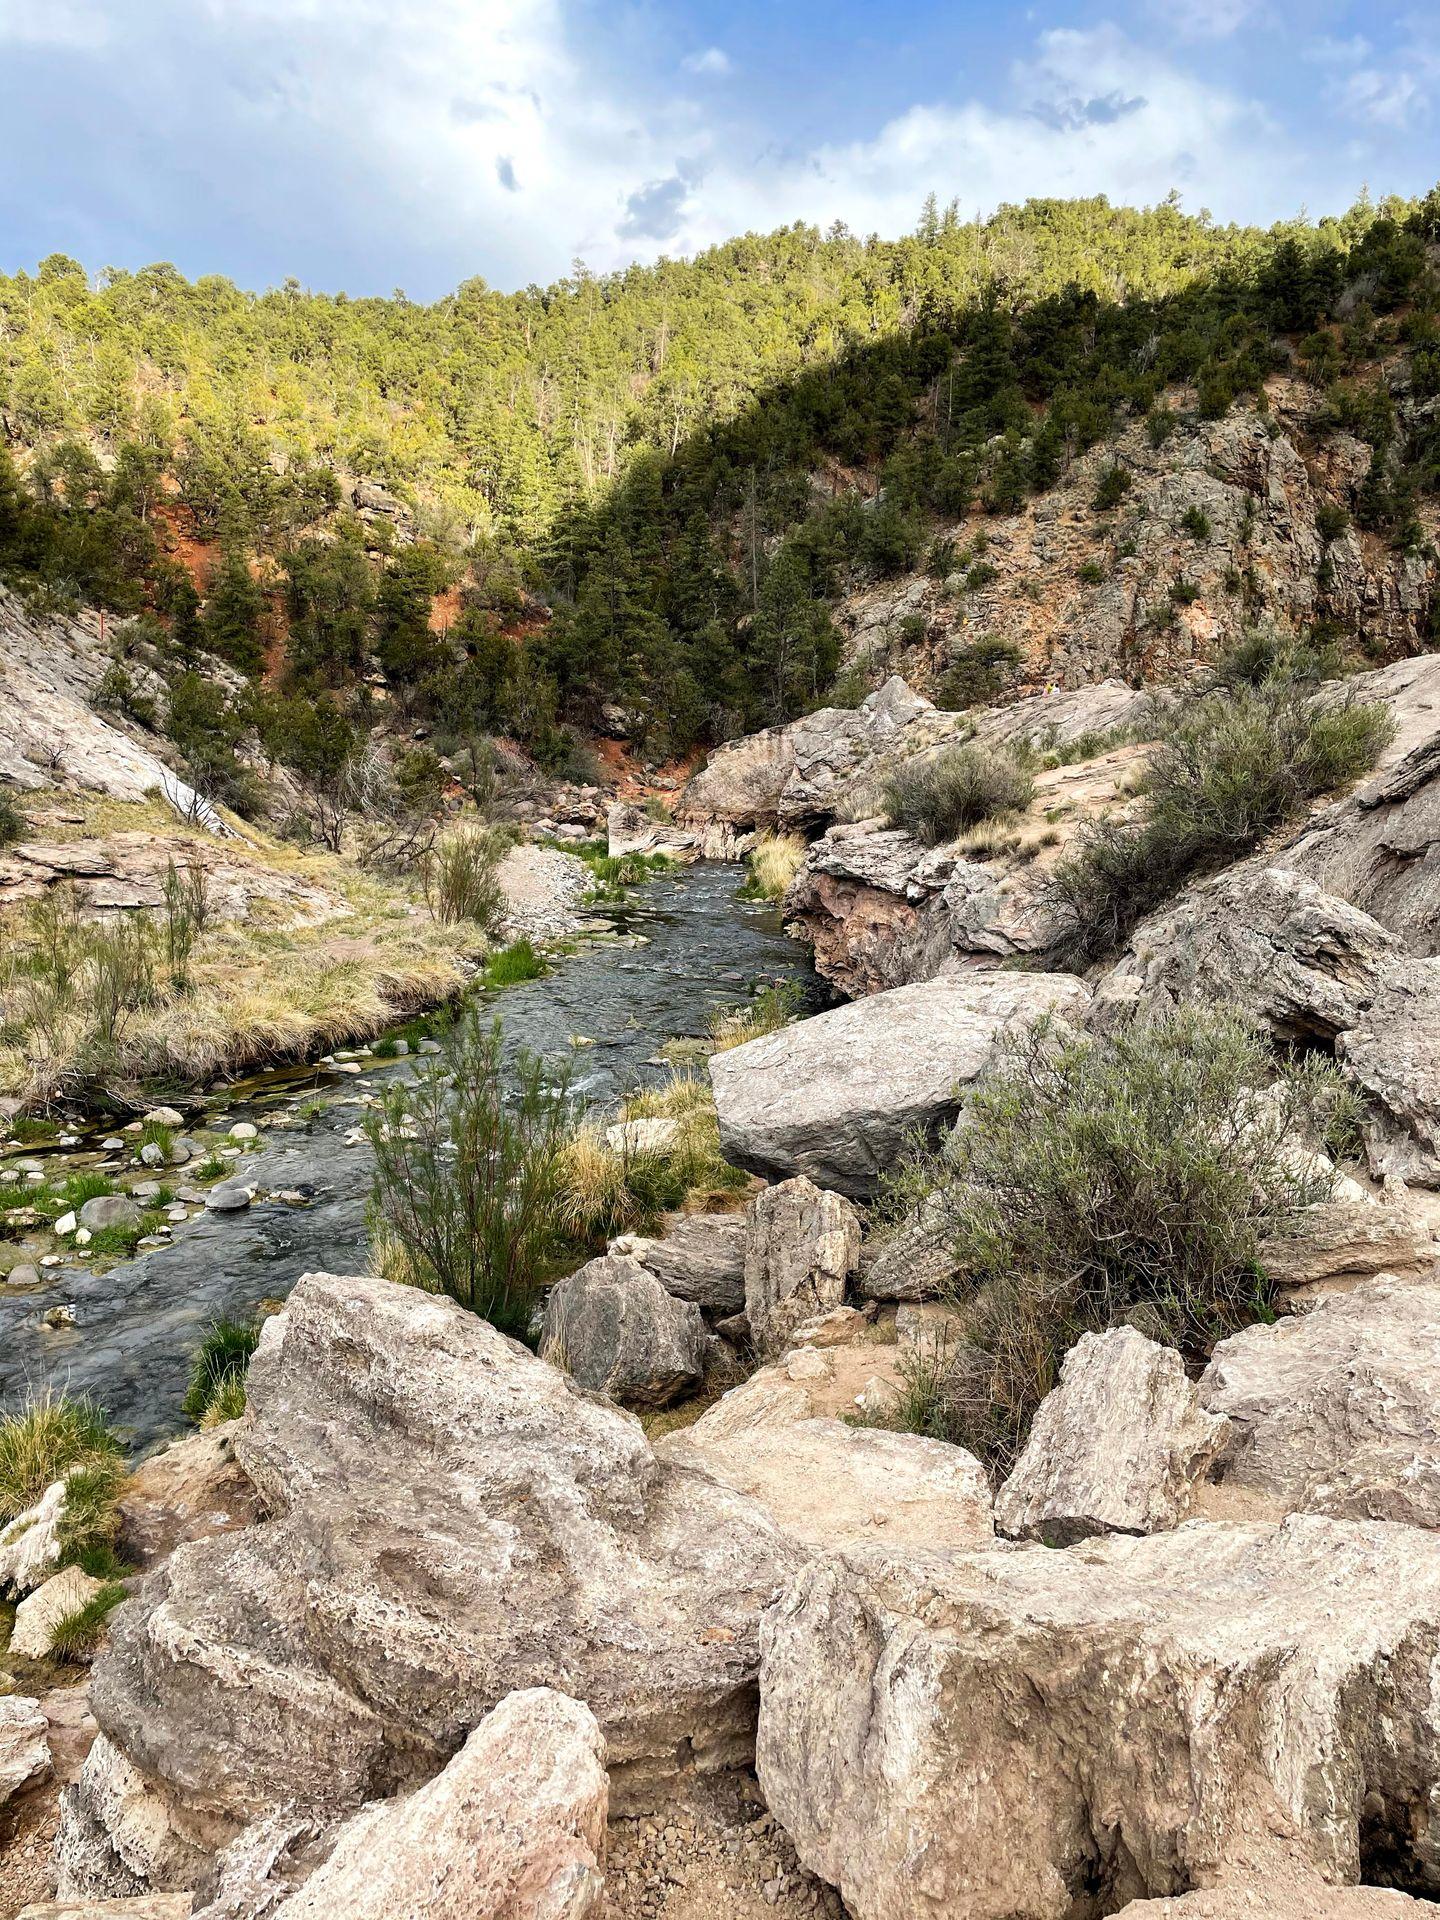 The Jemez River lined with large rocks on either side and a hill full of trees in the background.